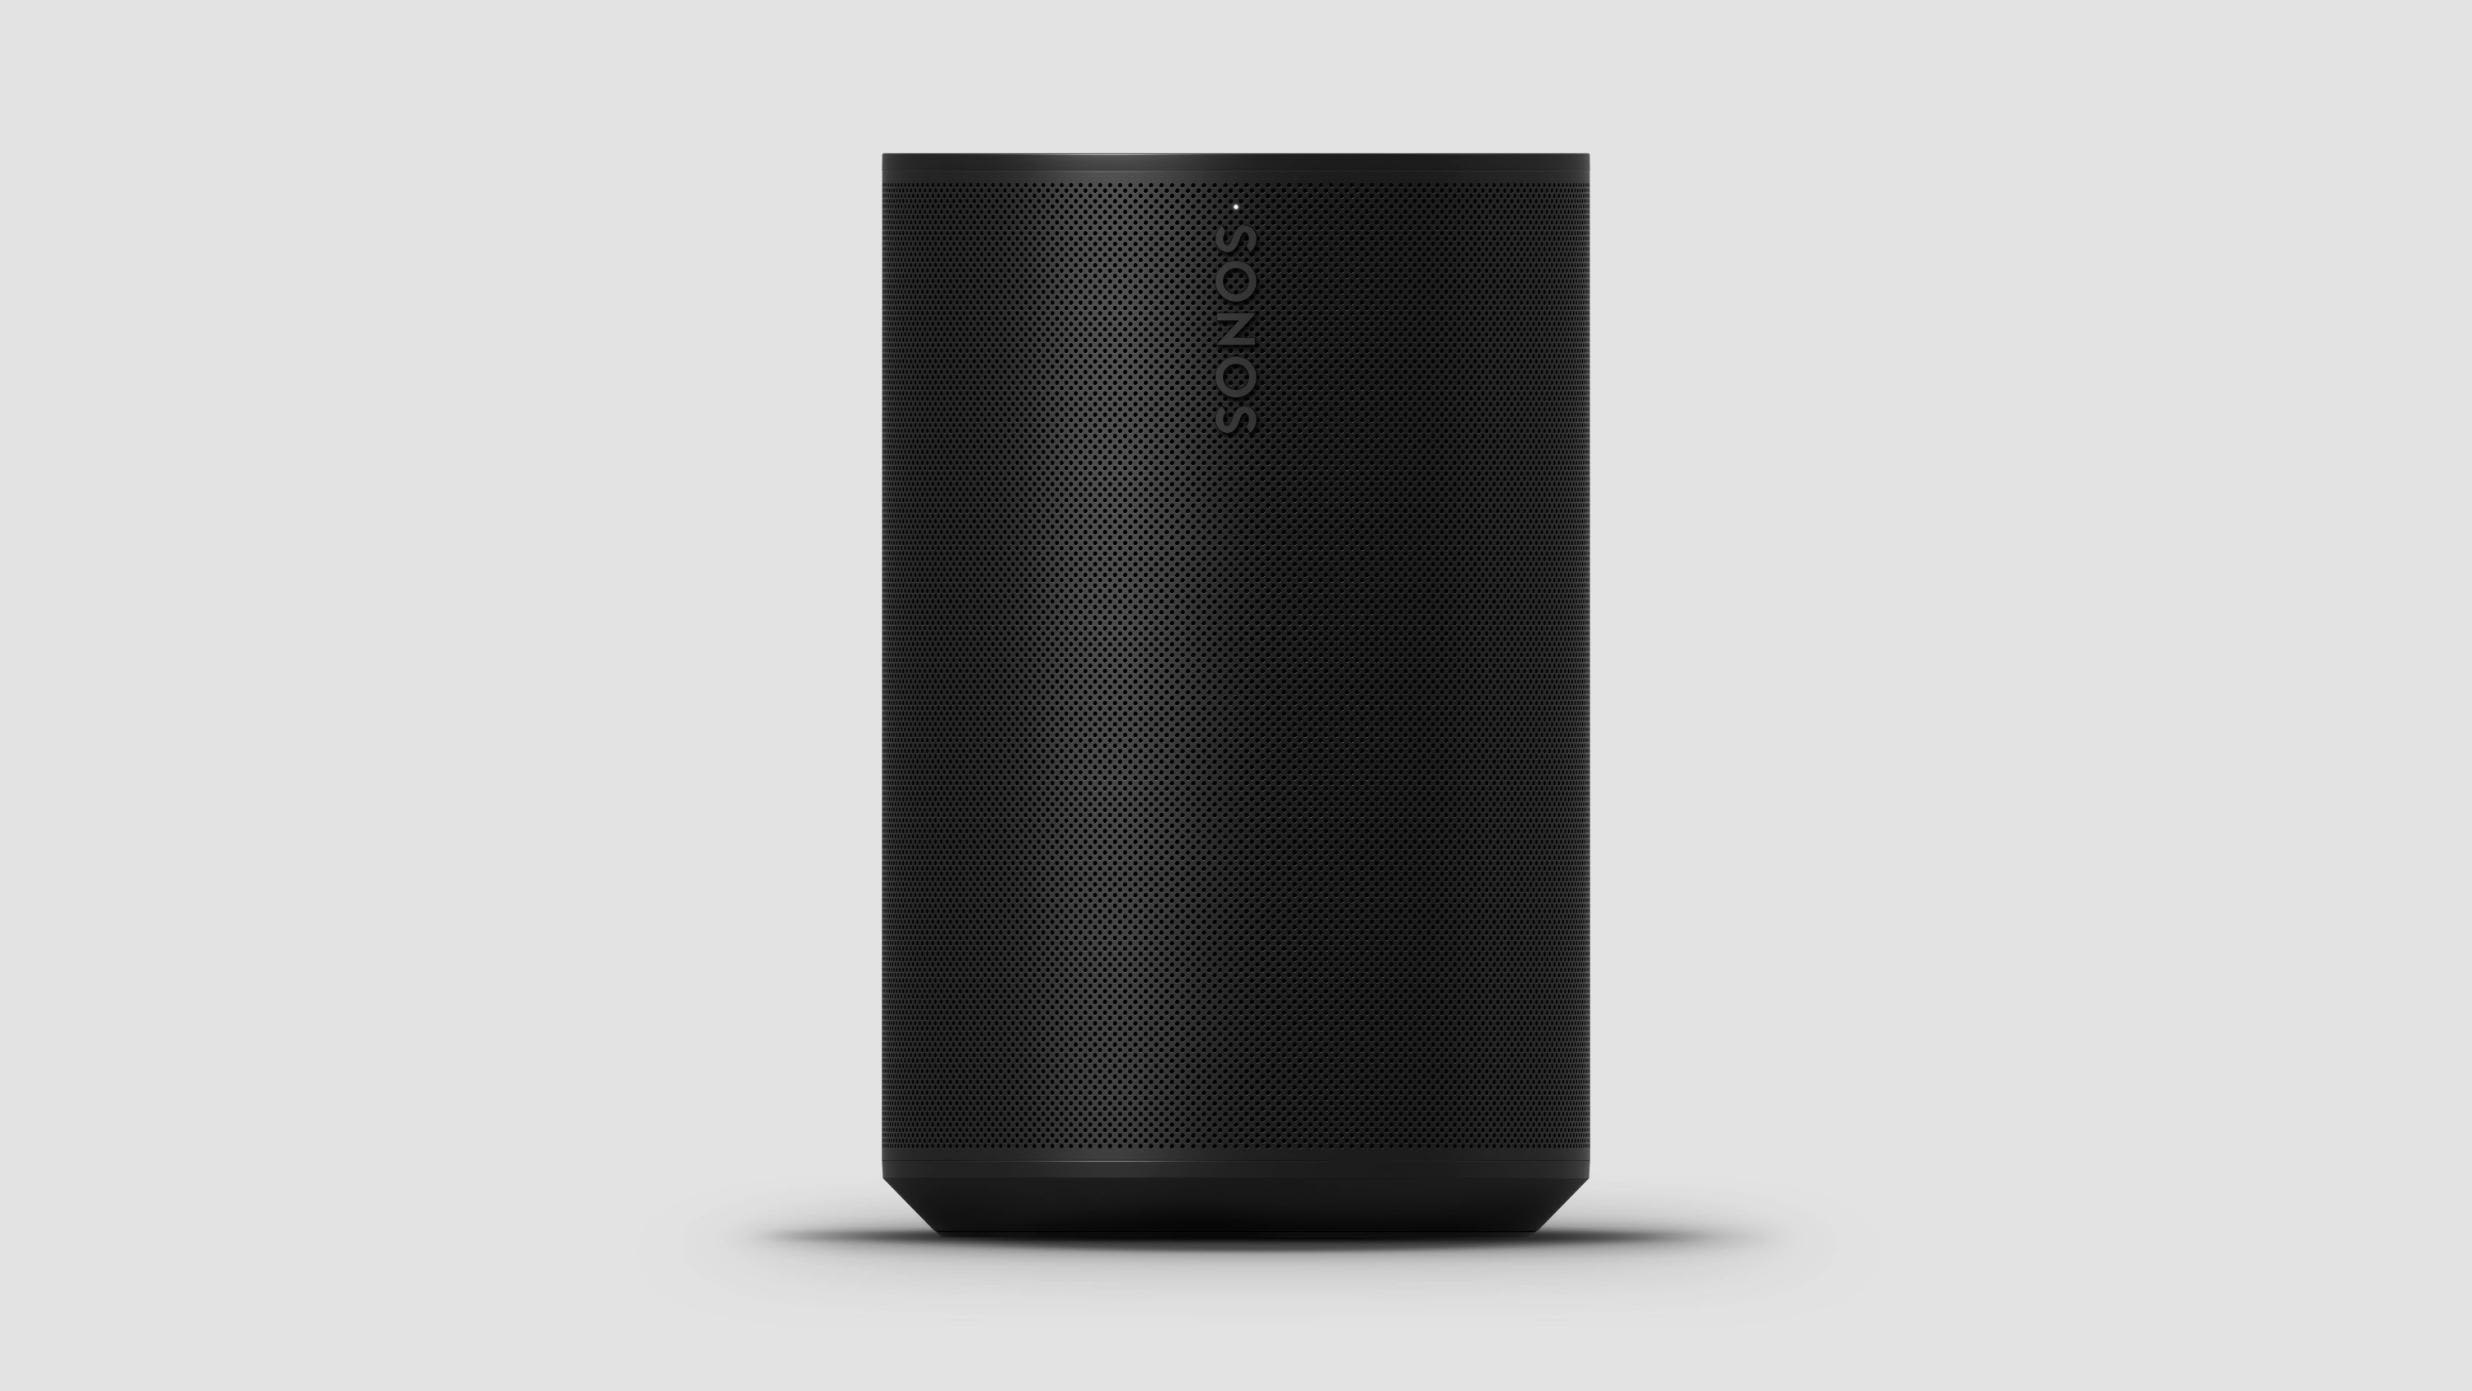 Exclusive: these are the new Sonos Era speakers - The Verge